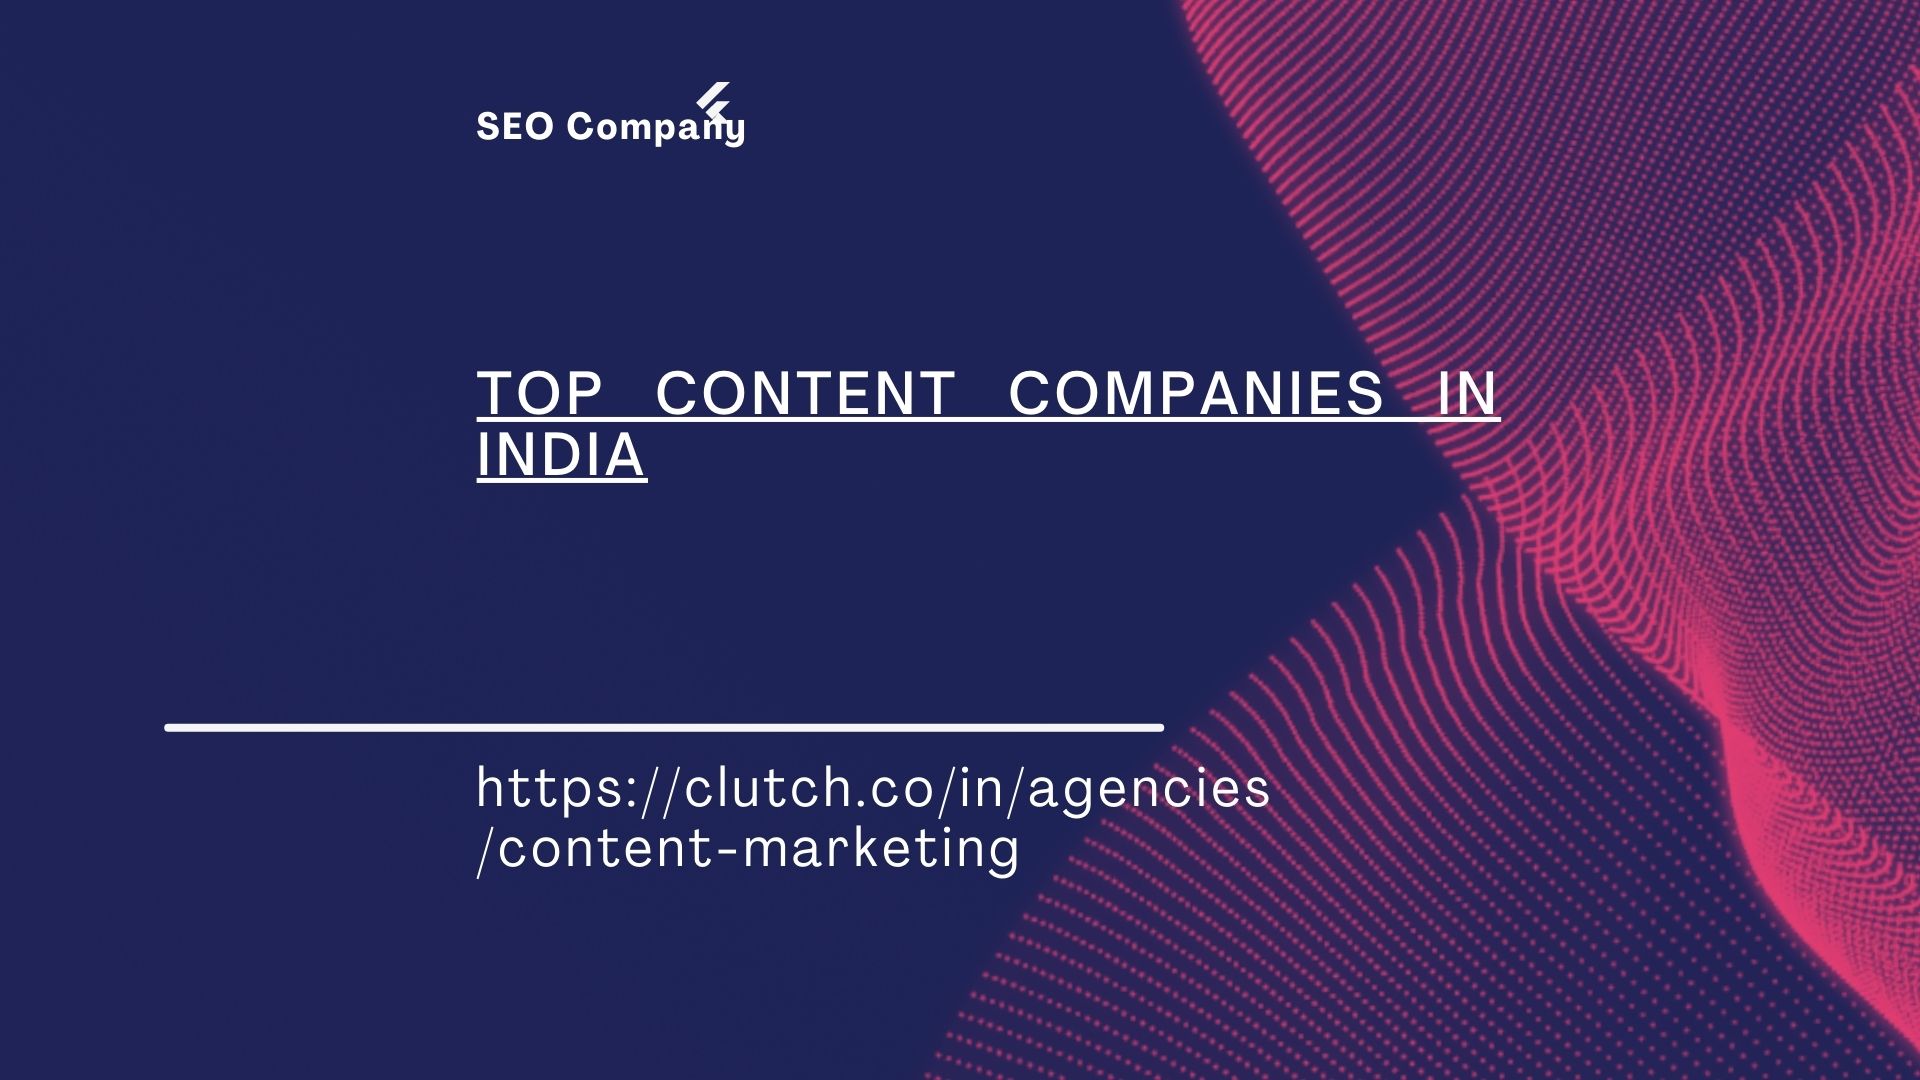 Top Content Companies in India